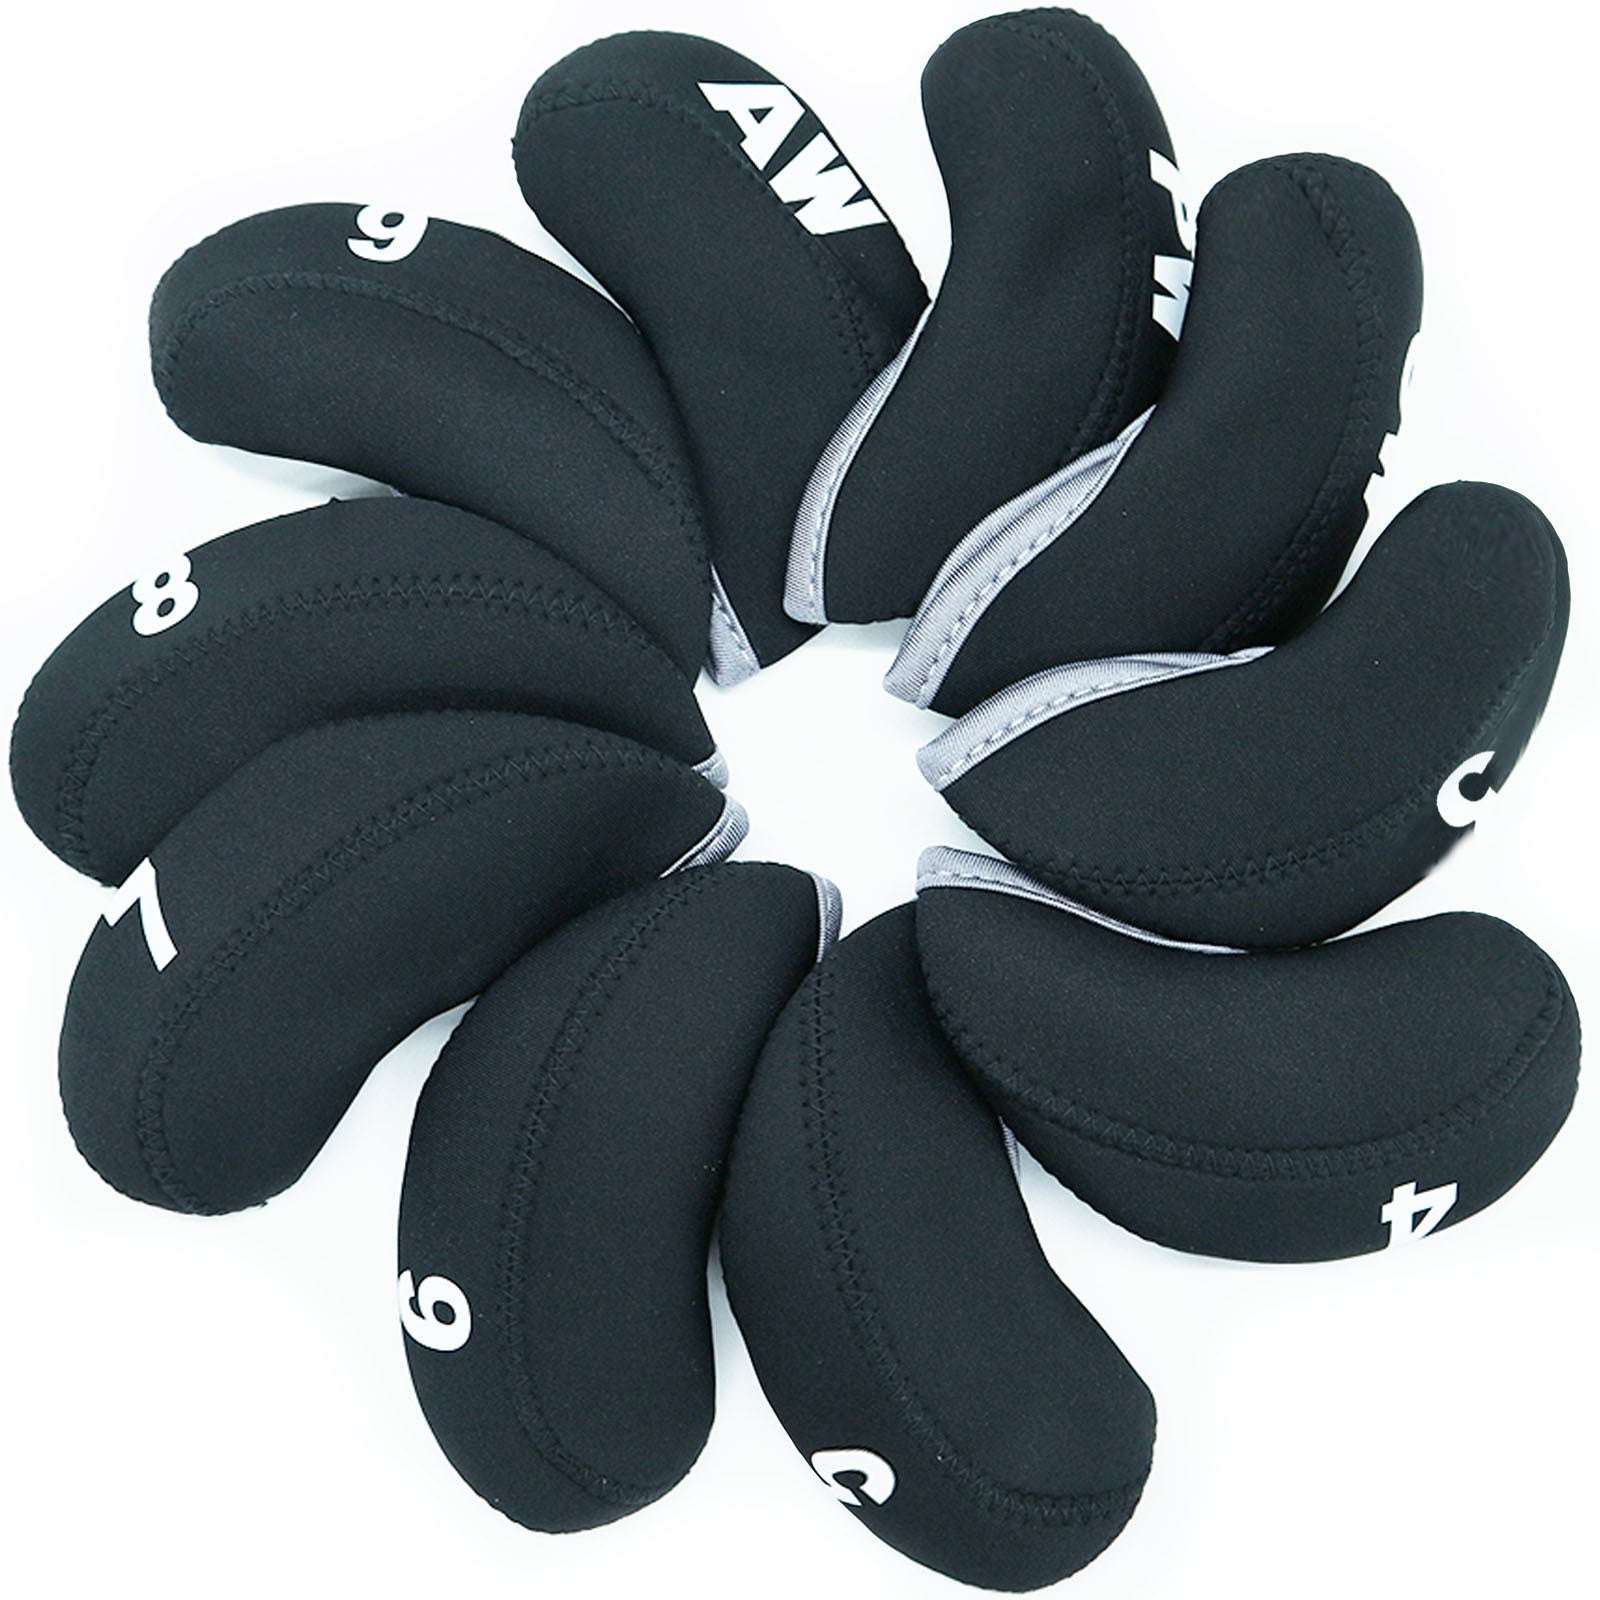 Diving Material Covers, Golf Club Covers, Protective Golf Covers - available at Sparq Mart